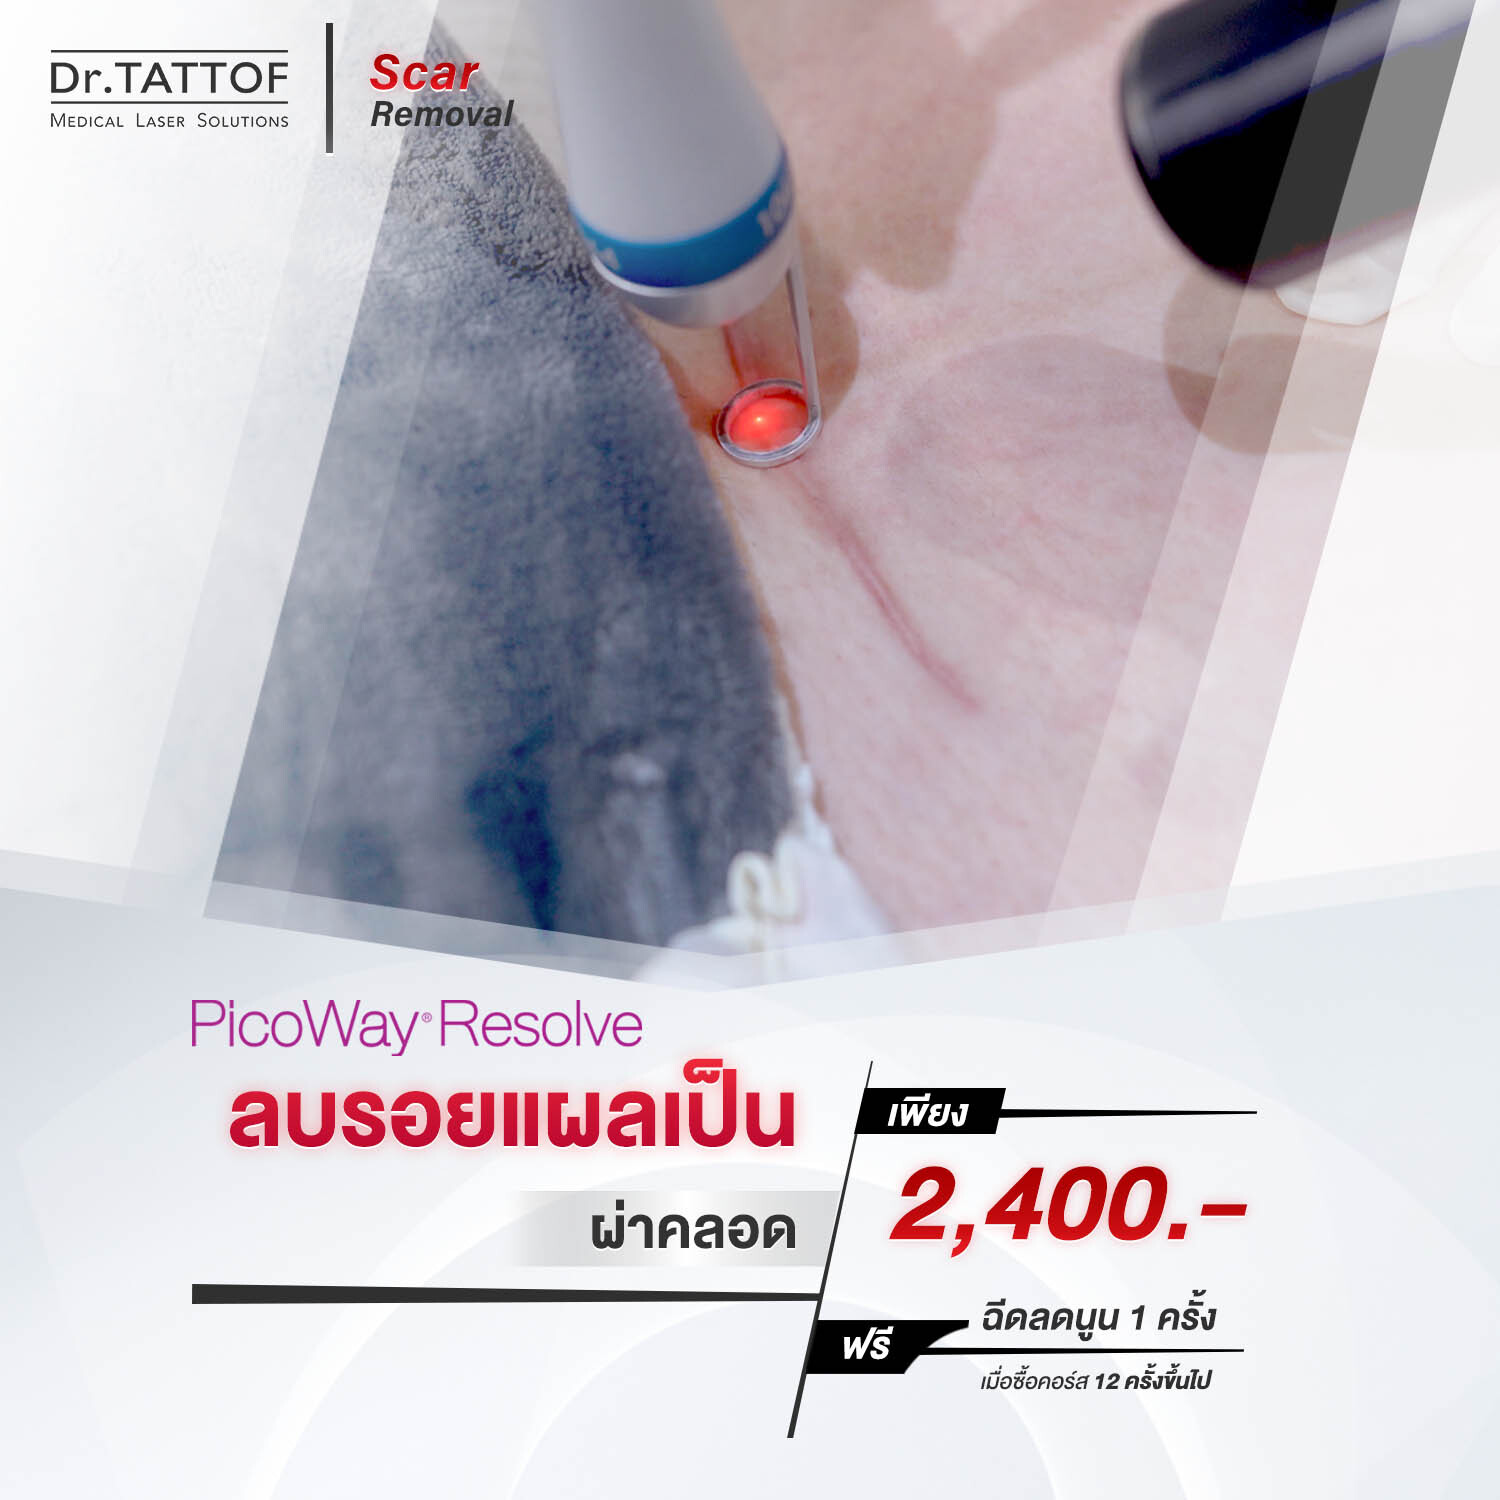 Dr.TATTOF Clinic จัดแคมเปญ "Bring Back HER Confidence"